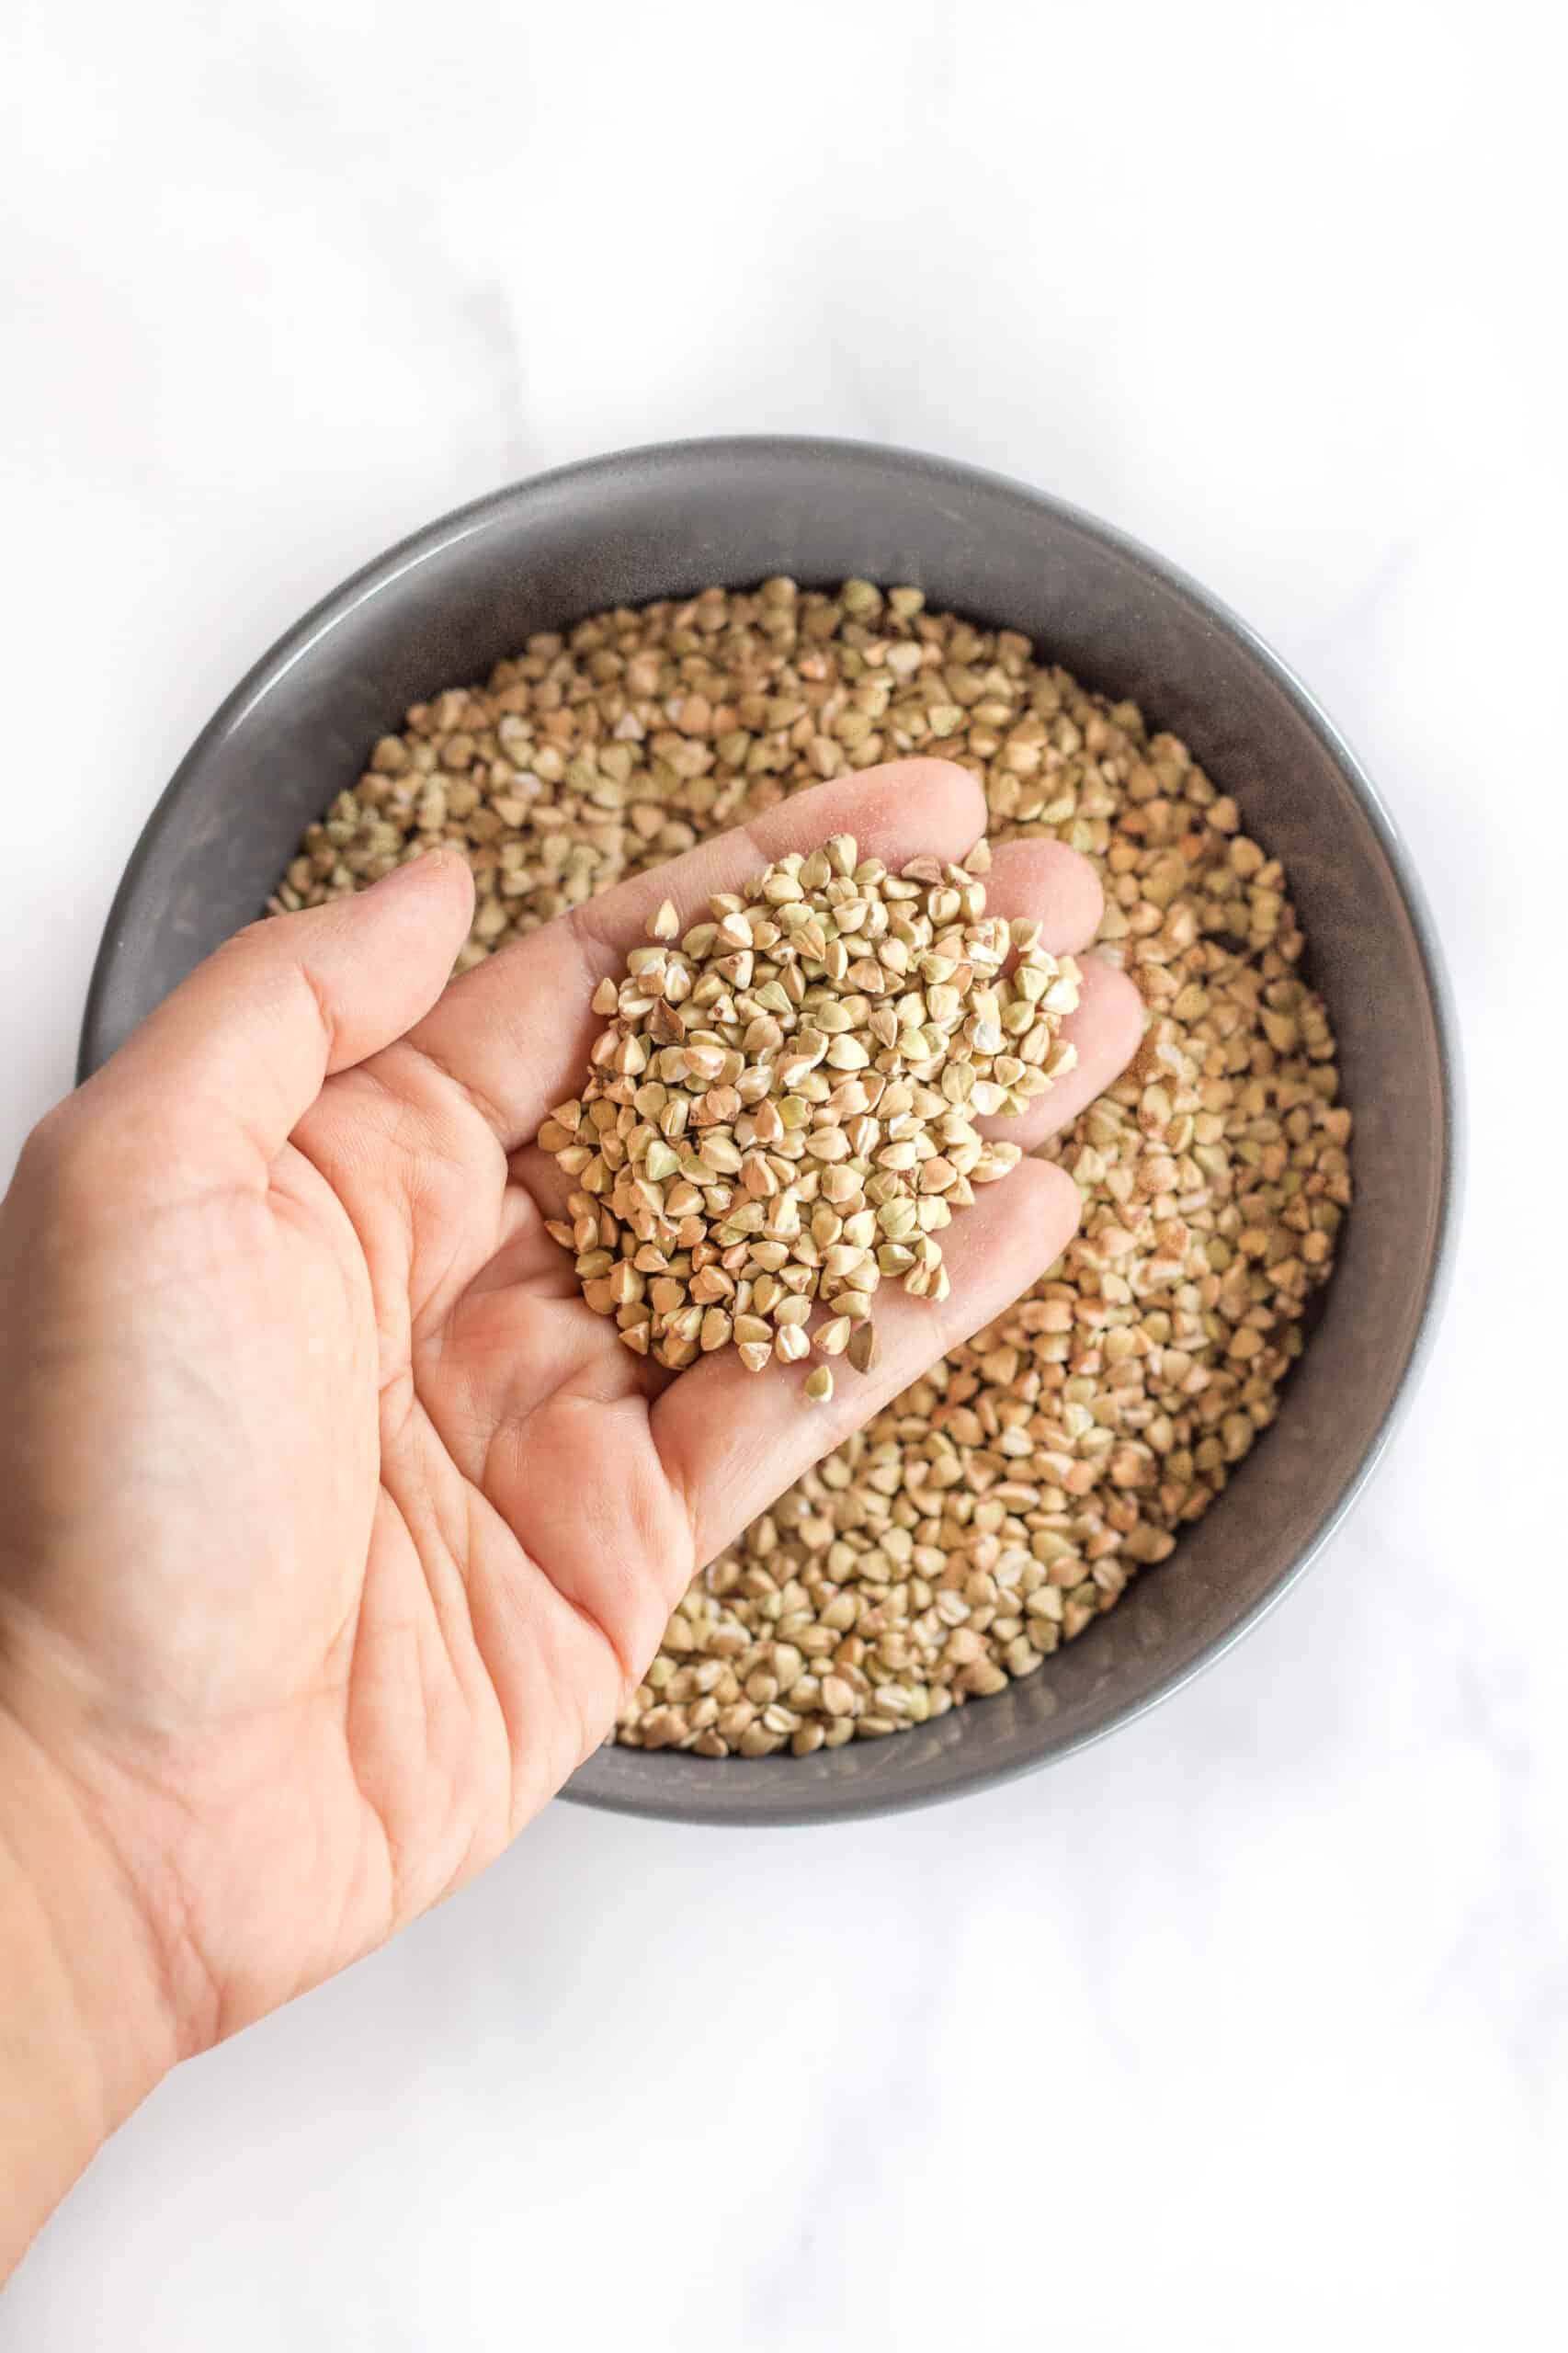 Hand holding up buckwheat groats from a bowl.